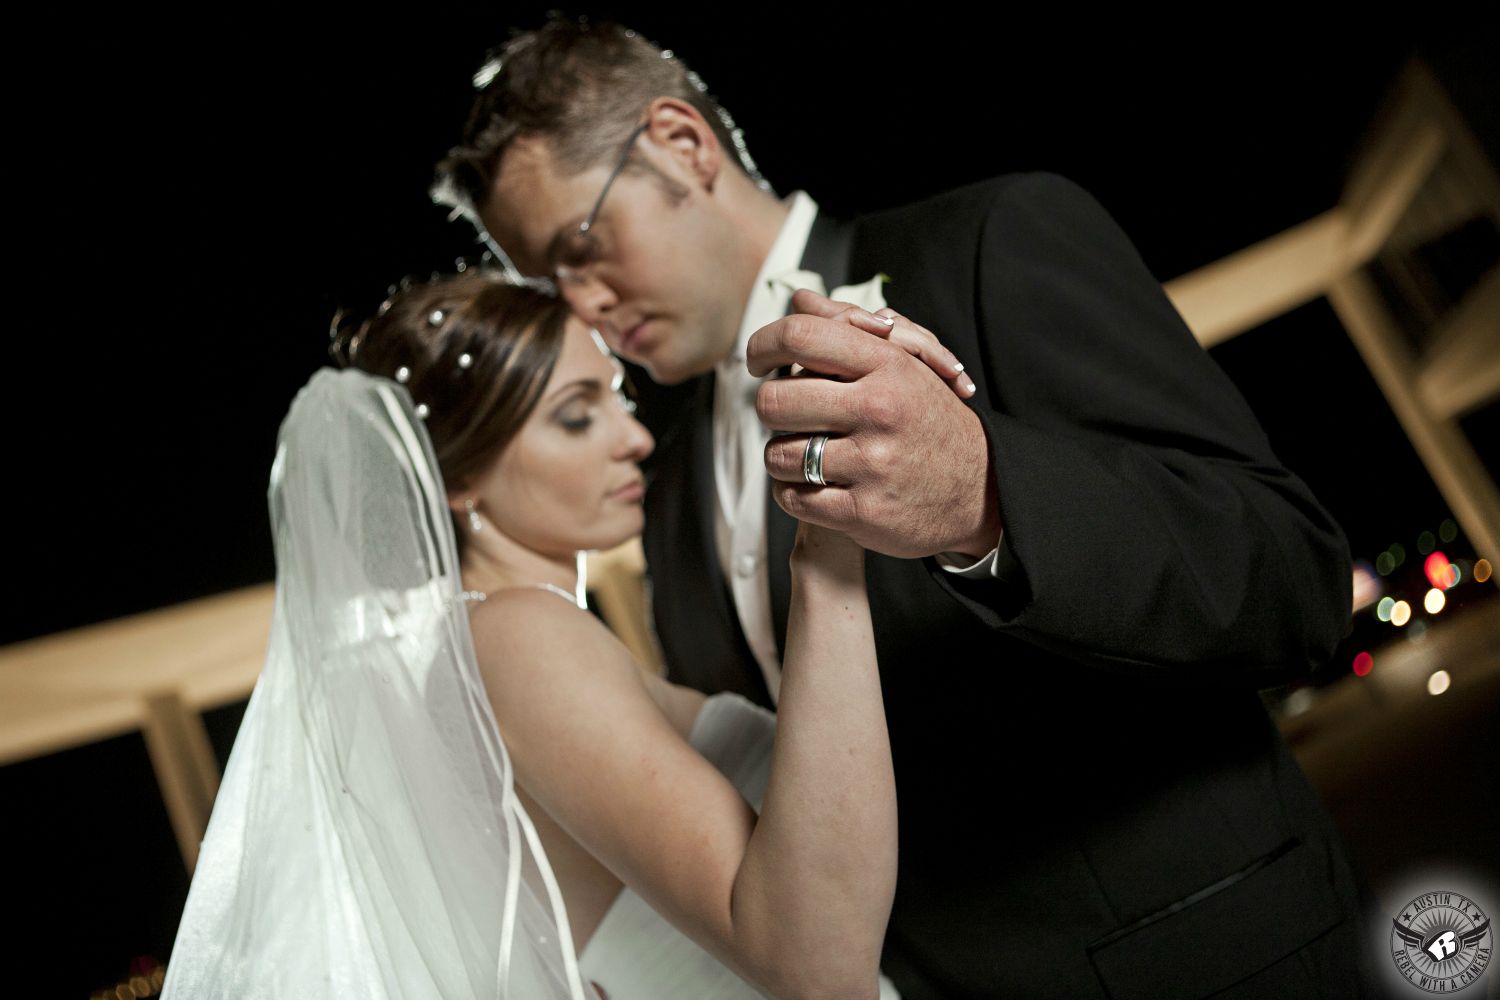 Bride in strapless dress, veil, and pearls in her hair and groom in black tuxedo and white vest and tie dance at night at the Long Center in Austin, Texas, on their wedding day with the groom's wedding ring in focus and the couple being backlit.